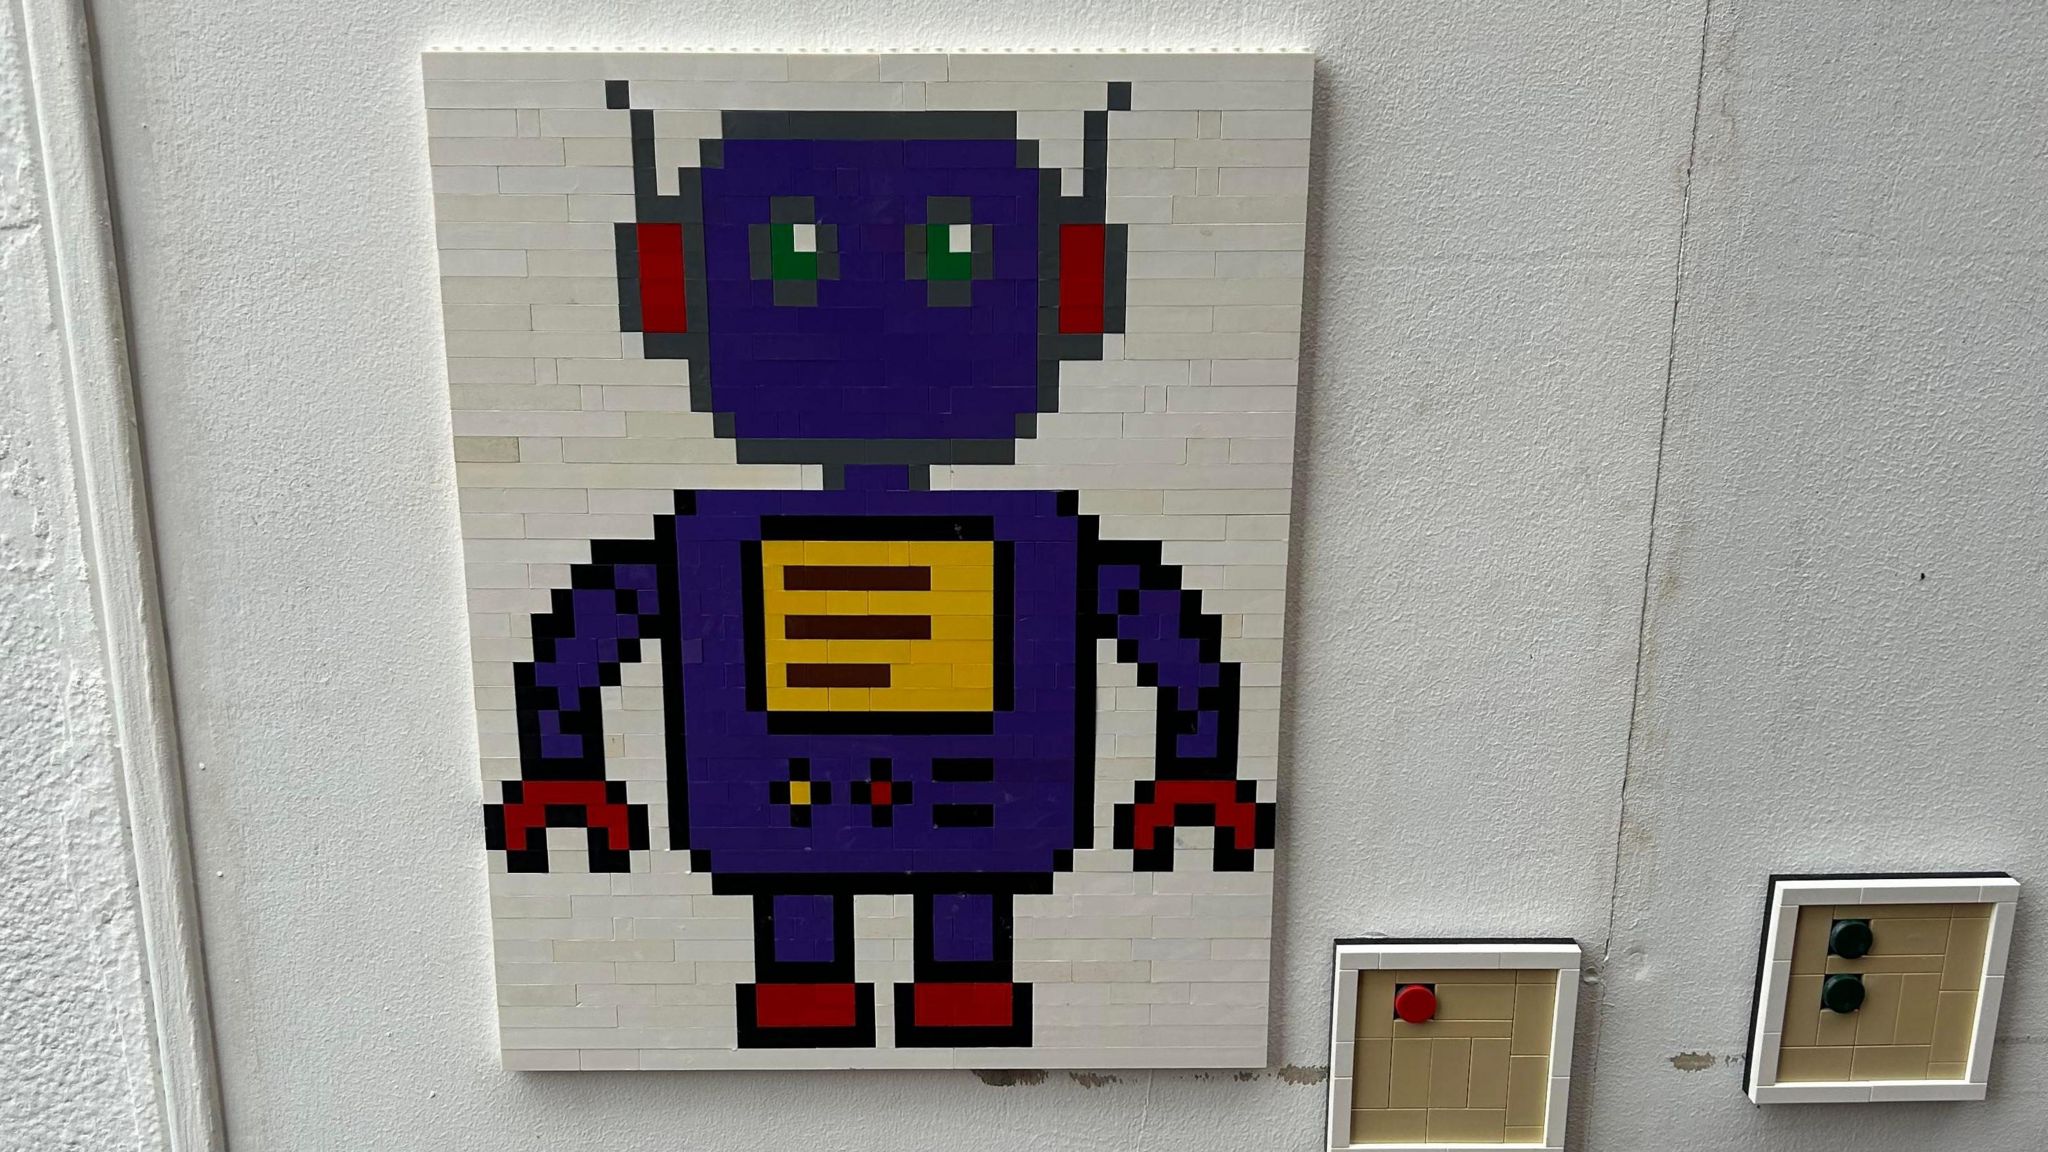 Robot made from Lego